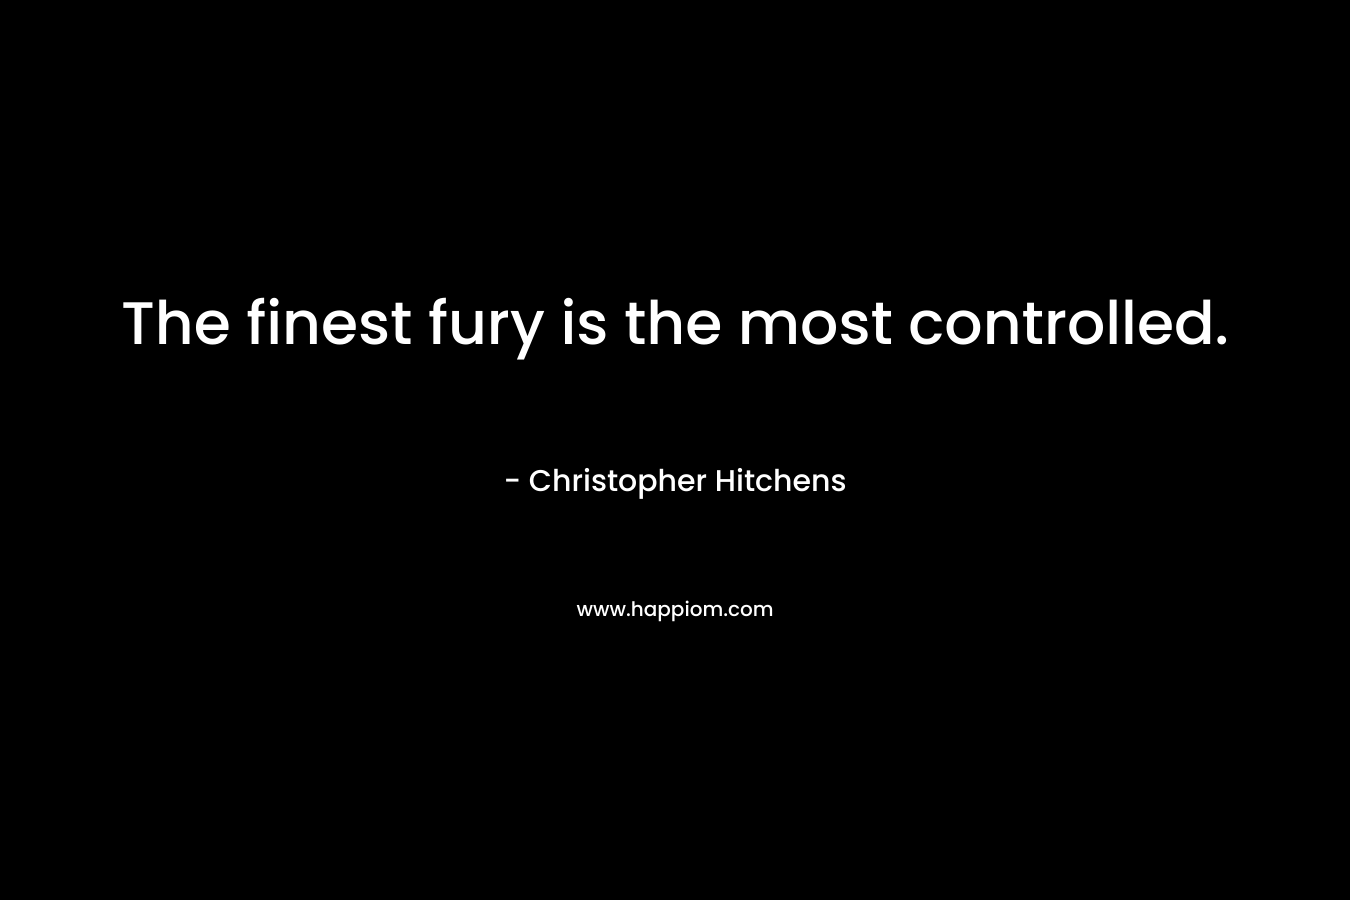 The finest fury is the most controlled.